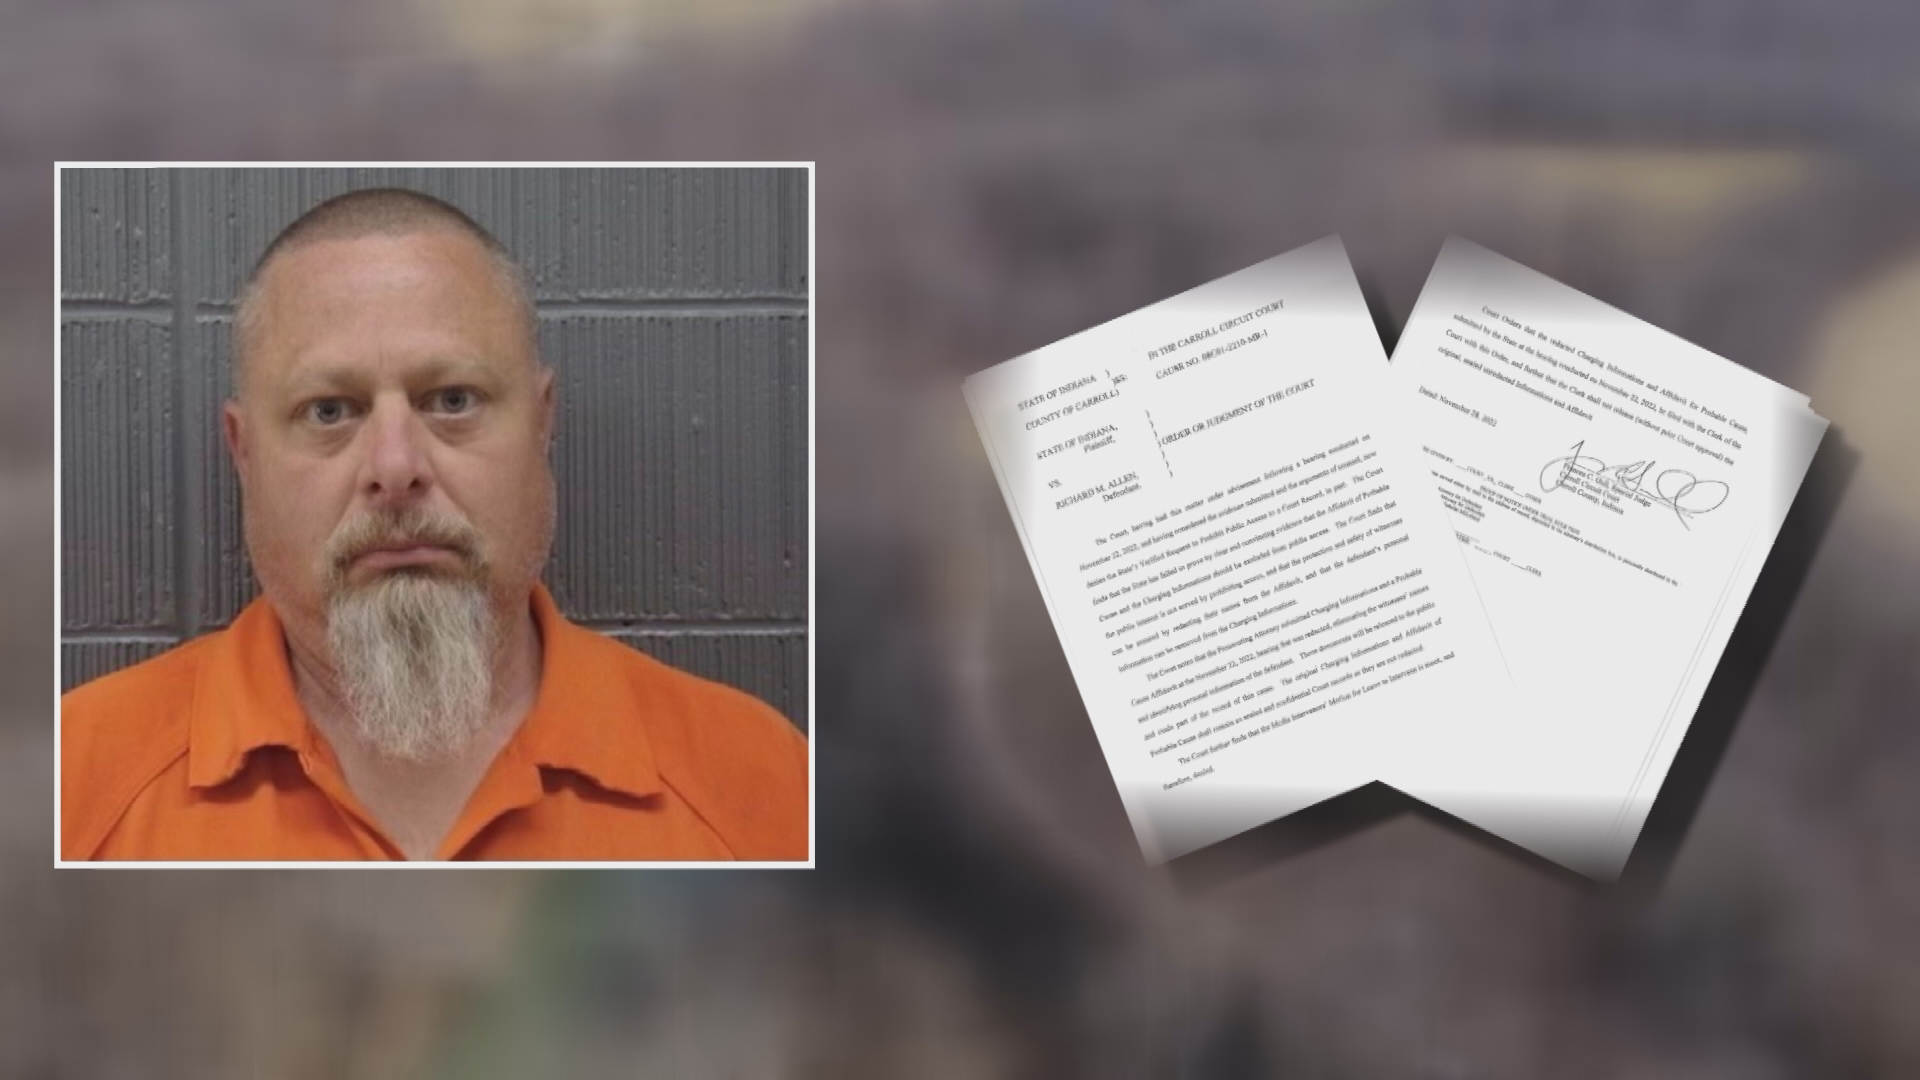 The Richard Allen probable cause has been released and we get a look at the reasons why police arrested a Carroll County man in connection with the Delphi murders.